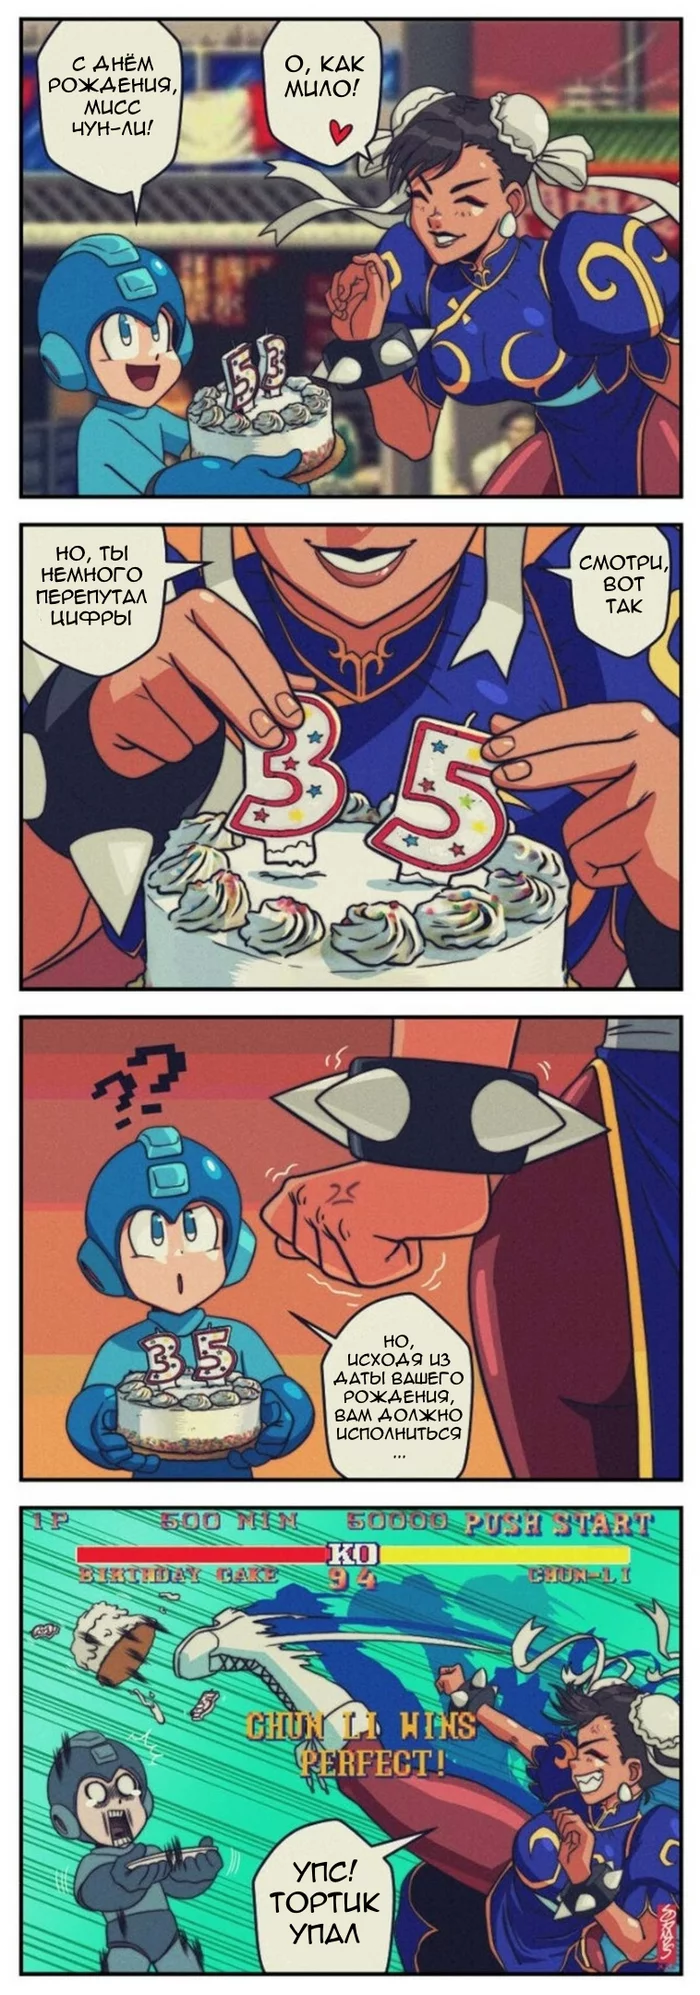 Don't annoy a woman by talking about her age - Comics, Street fighter, Chun-Li, Megaman, Birthday, Translation, Translated by myself, Longpost, Humor